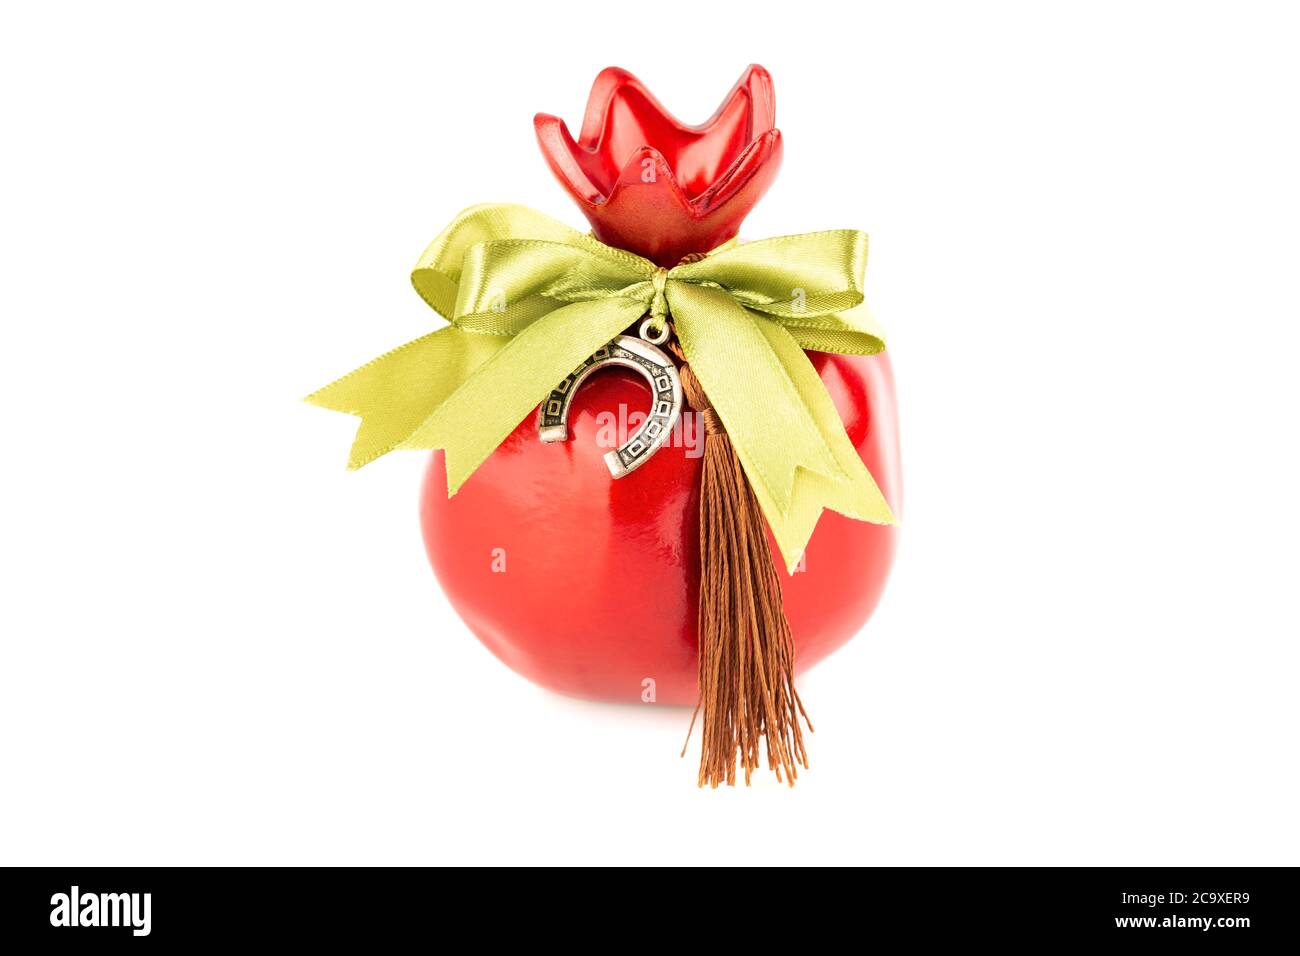 Red pomegranate souvenir with green ribbon, tassel  and horseshoe isolated on white background. Stock Photo